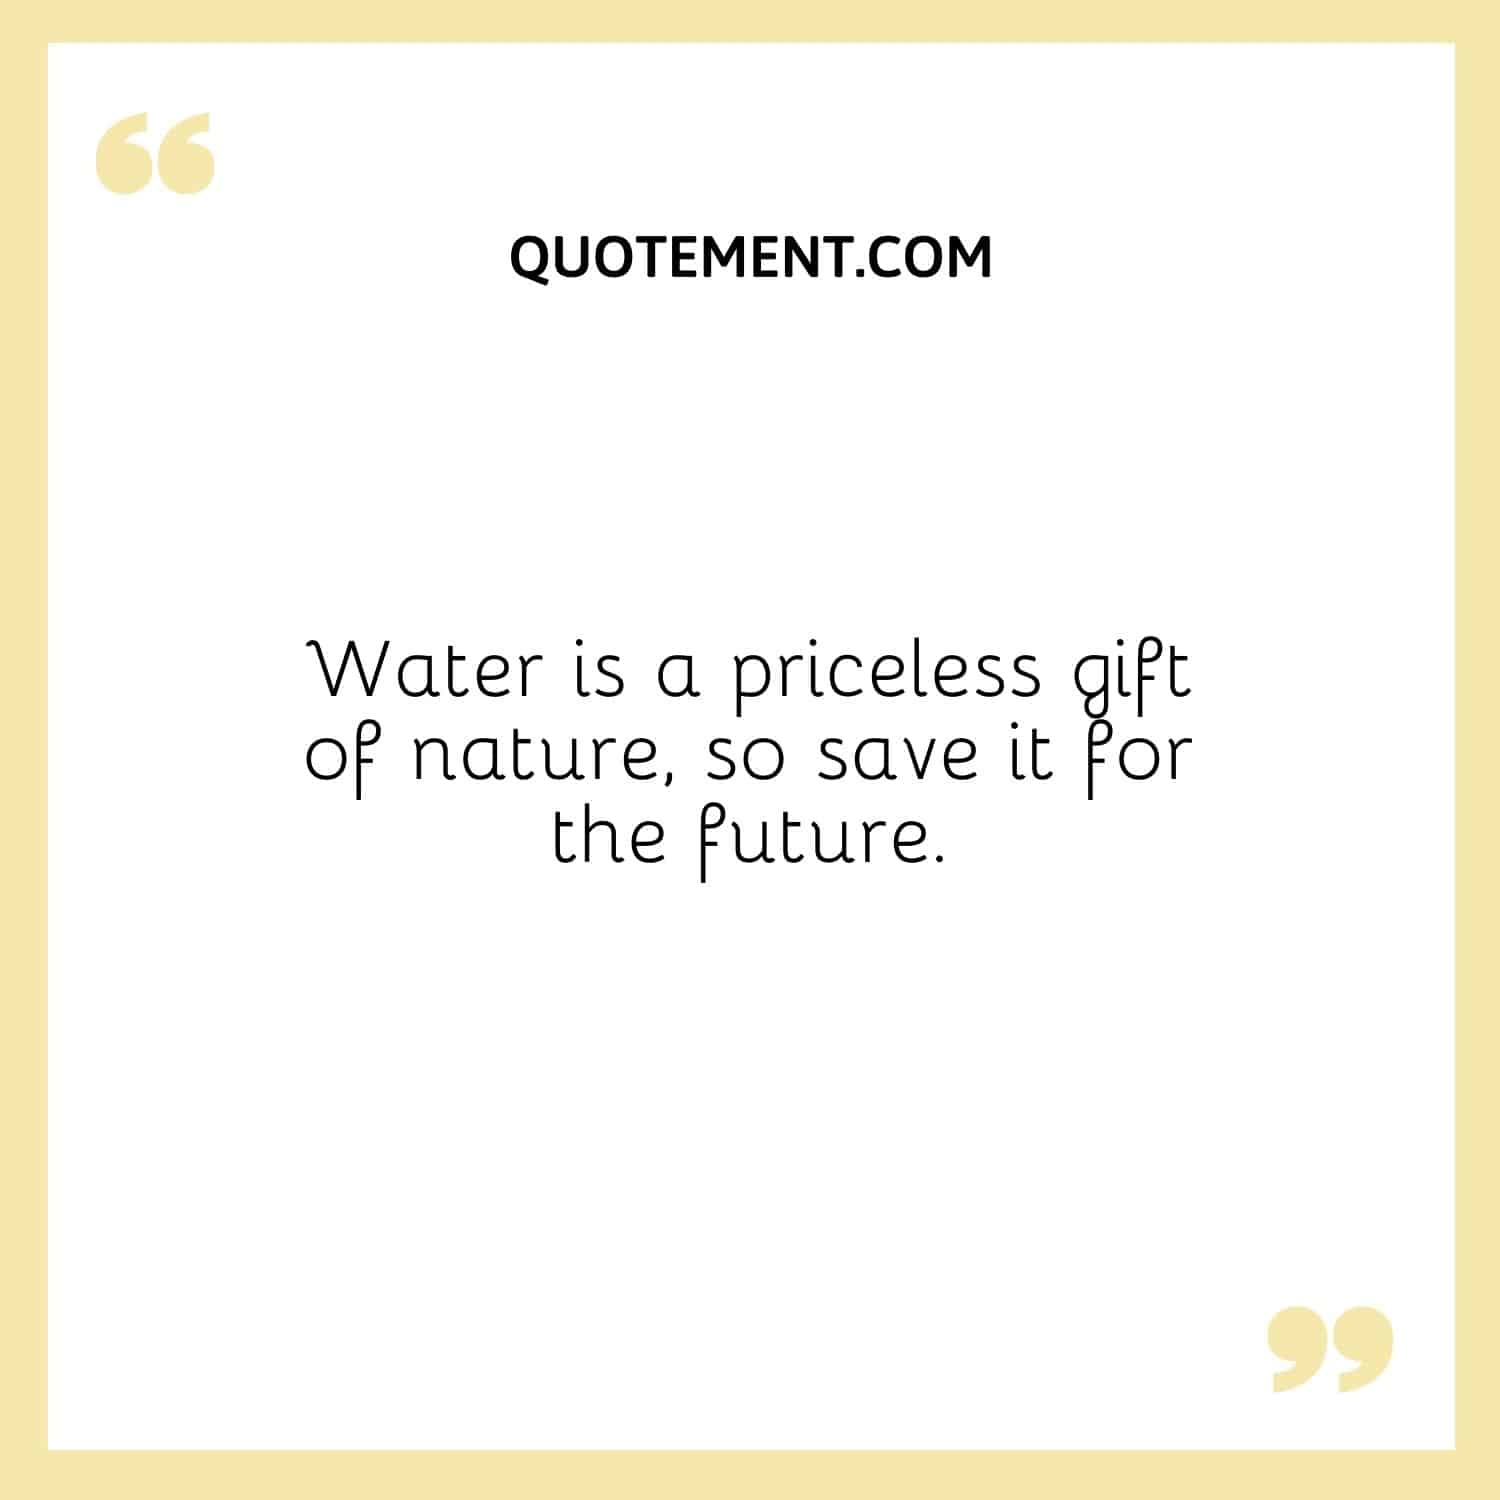 Water is a priceless gift of nature, so save it for the future.